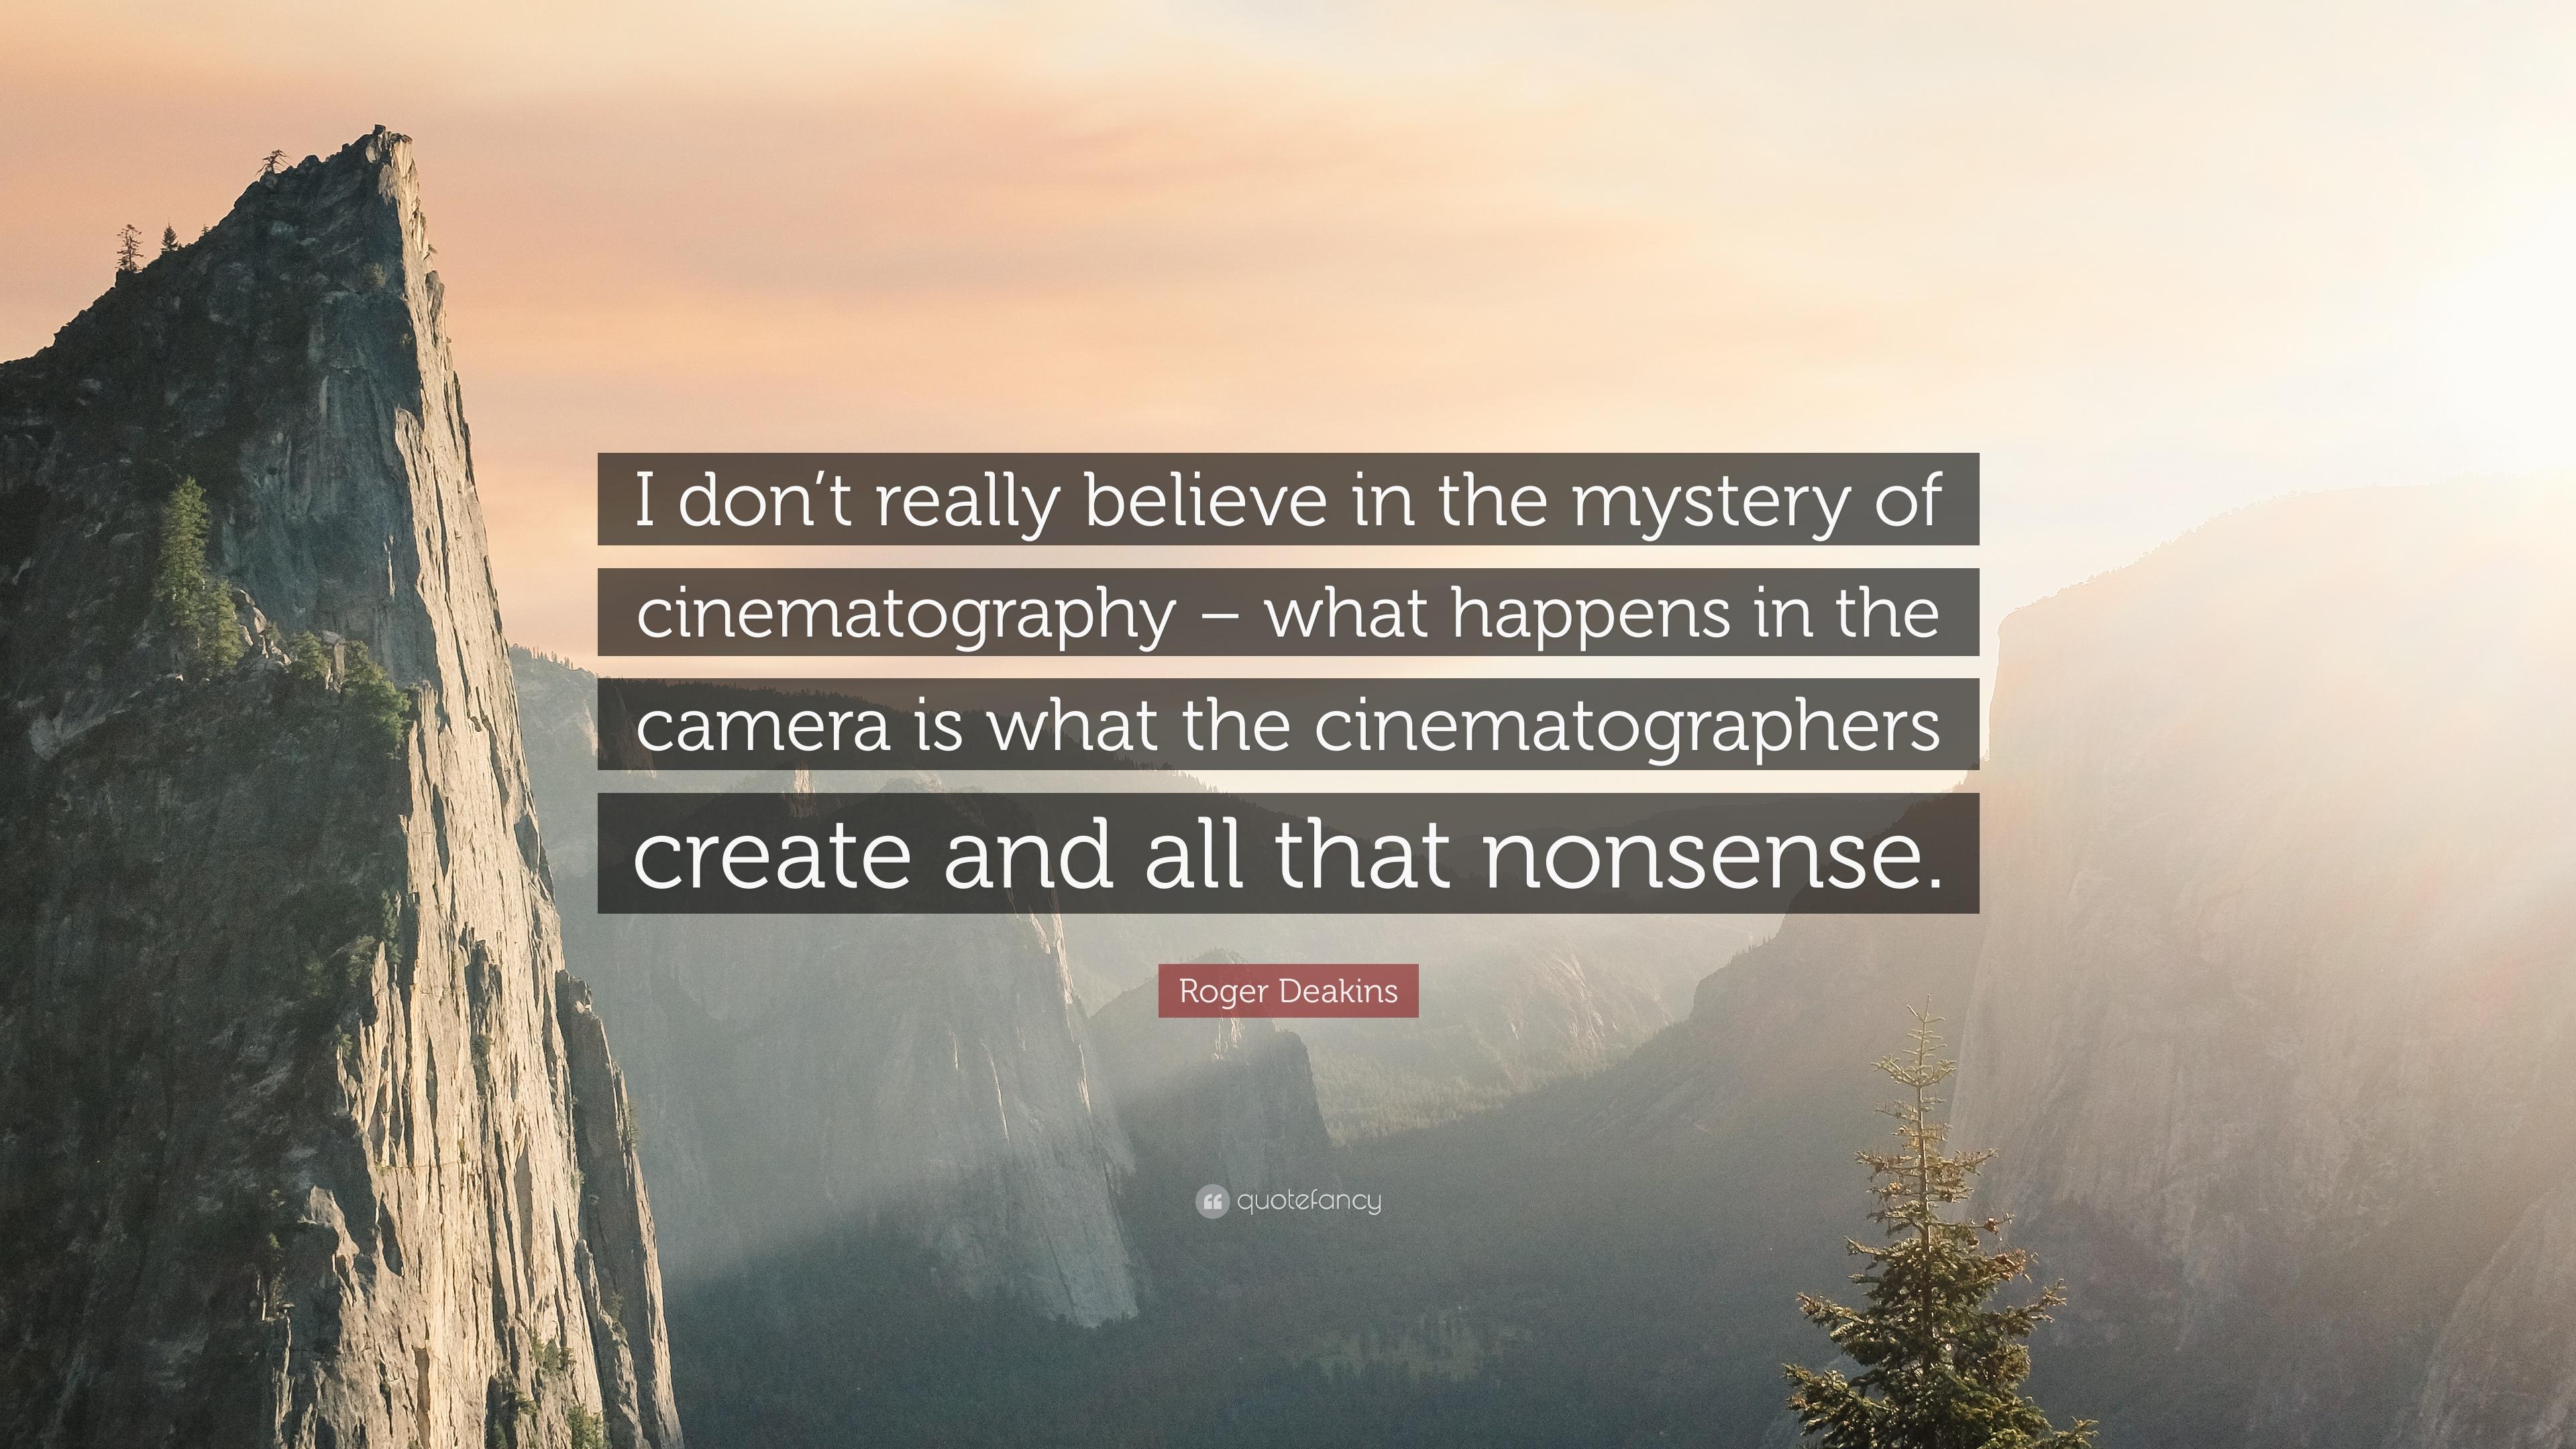 Roger Deakins Quote: “I don't really believe in the mystery